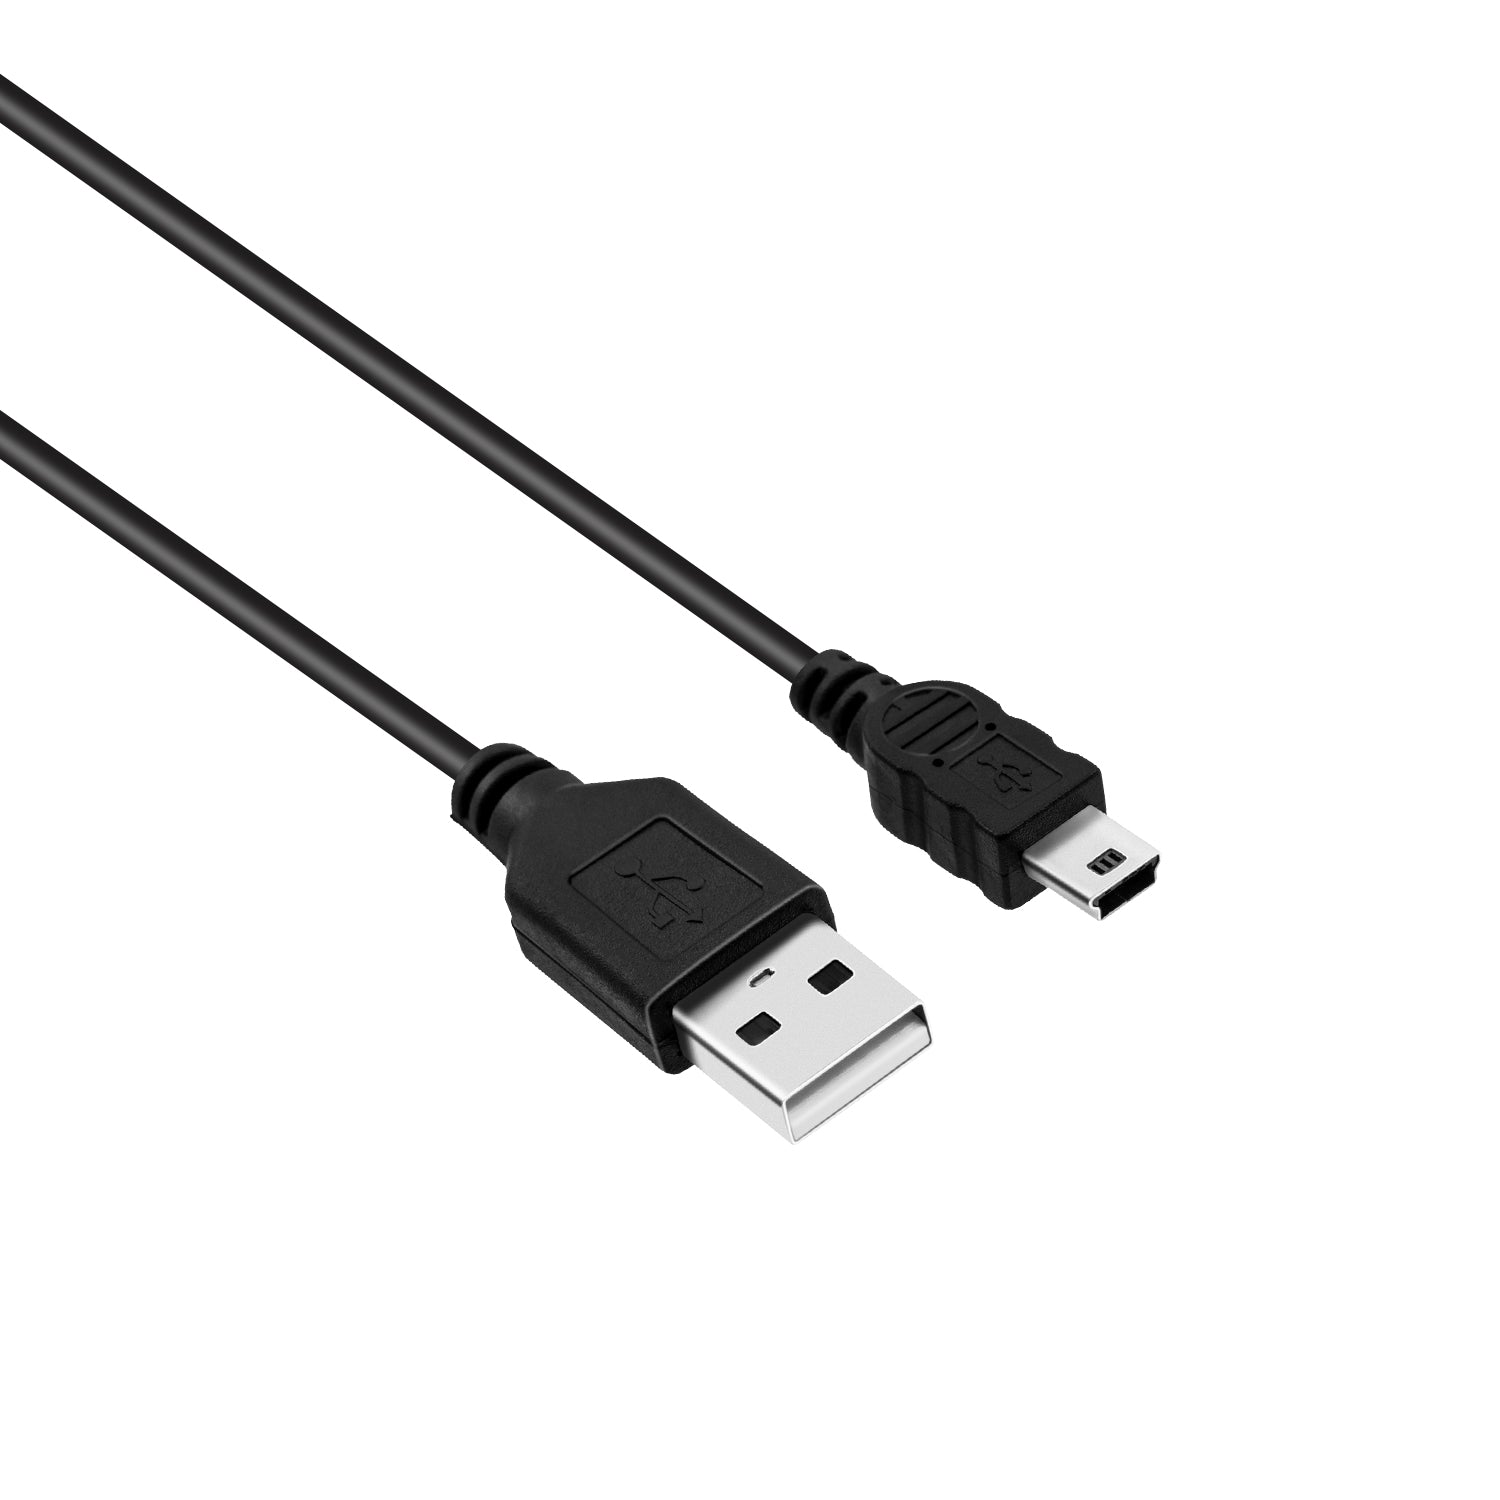 PlayStation-1 Meter USB to mini USB Power Charge Cable for PS3 Controller/Mini Port Device - Black